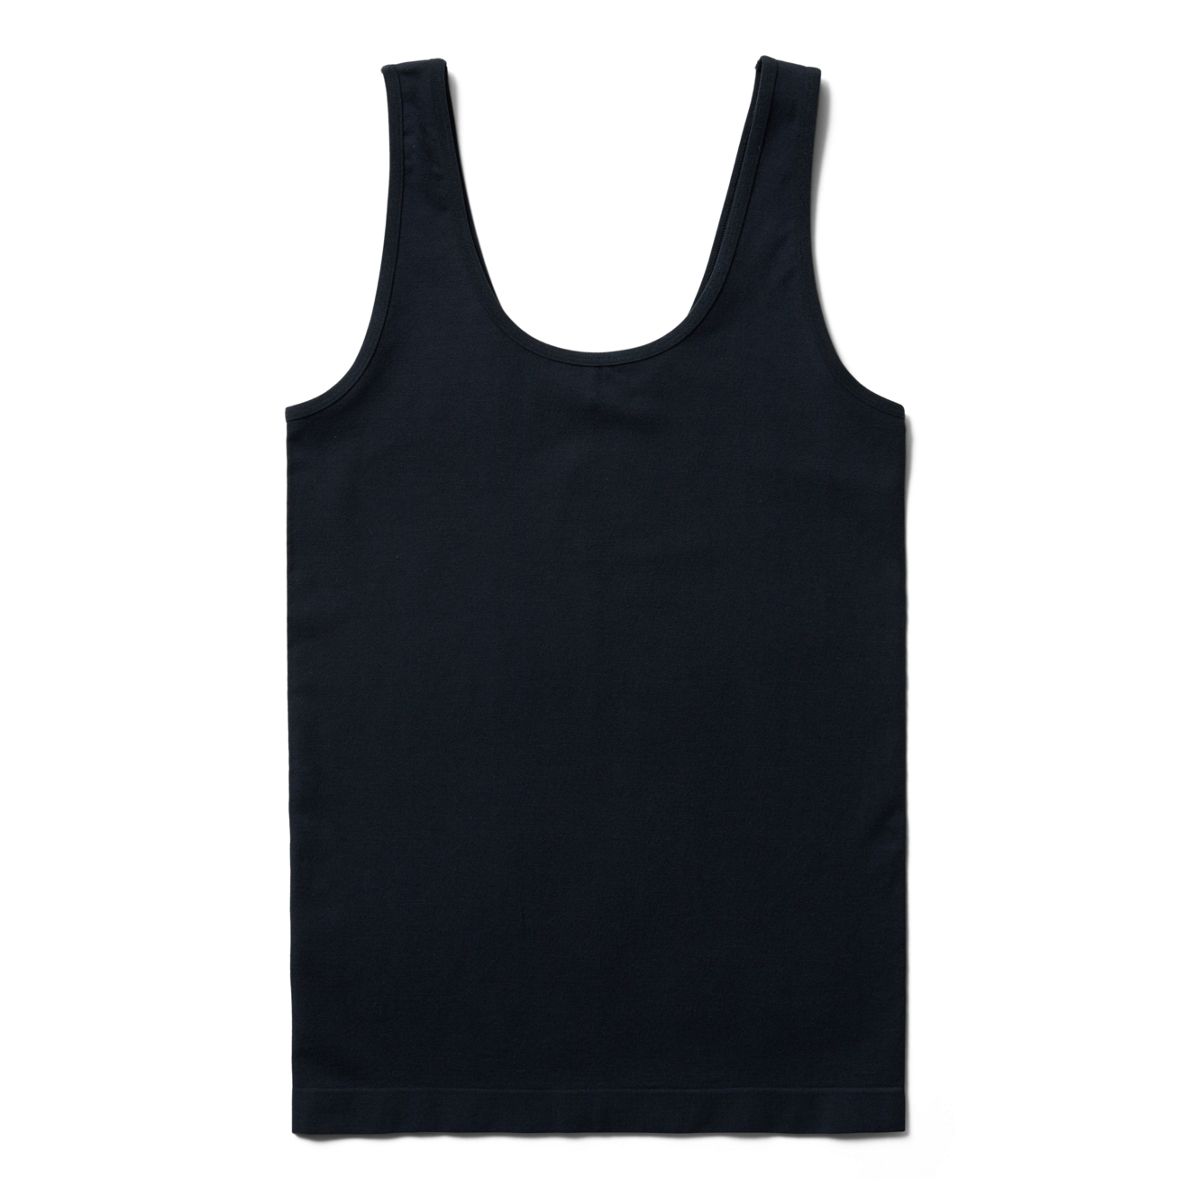 Women's The Drop Camisoles − Sale: at $37.90+